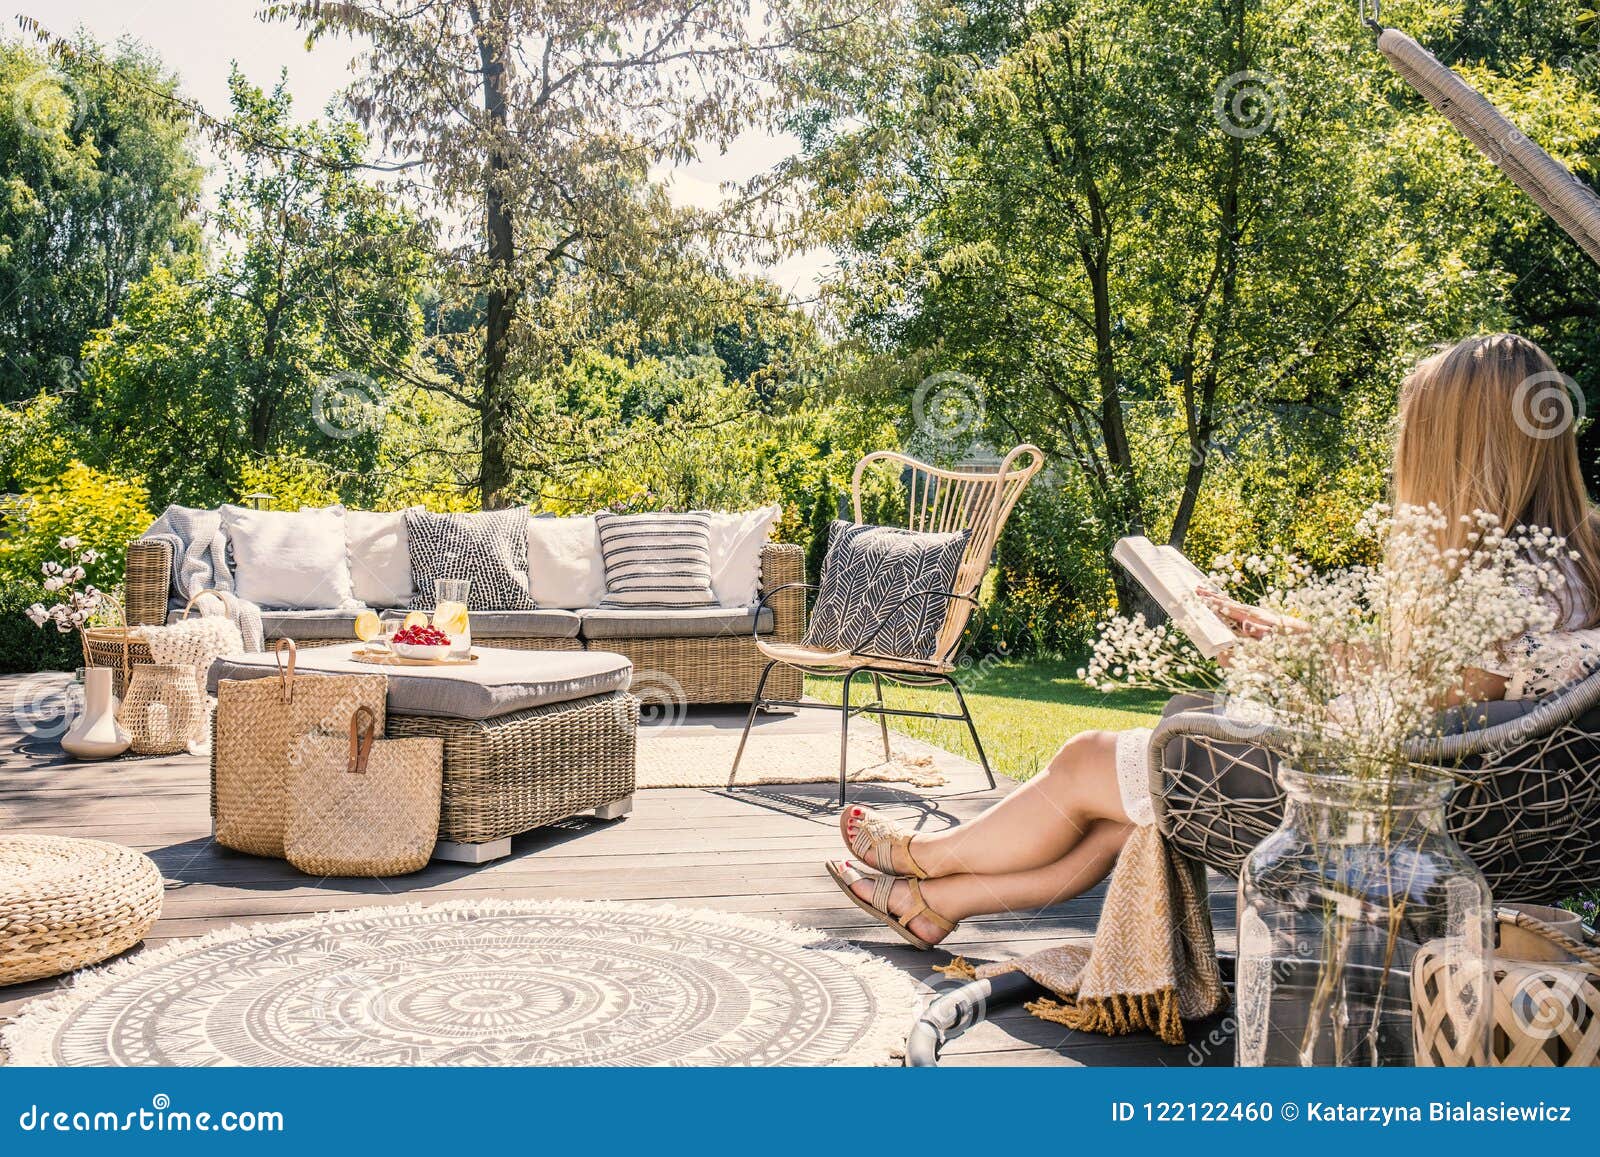 woman reading book while relaxing at terrace with rattan furniture in the garden. real photo